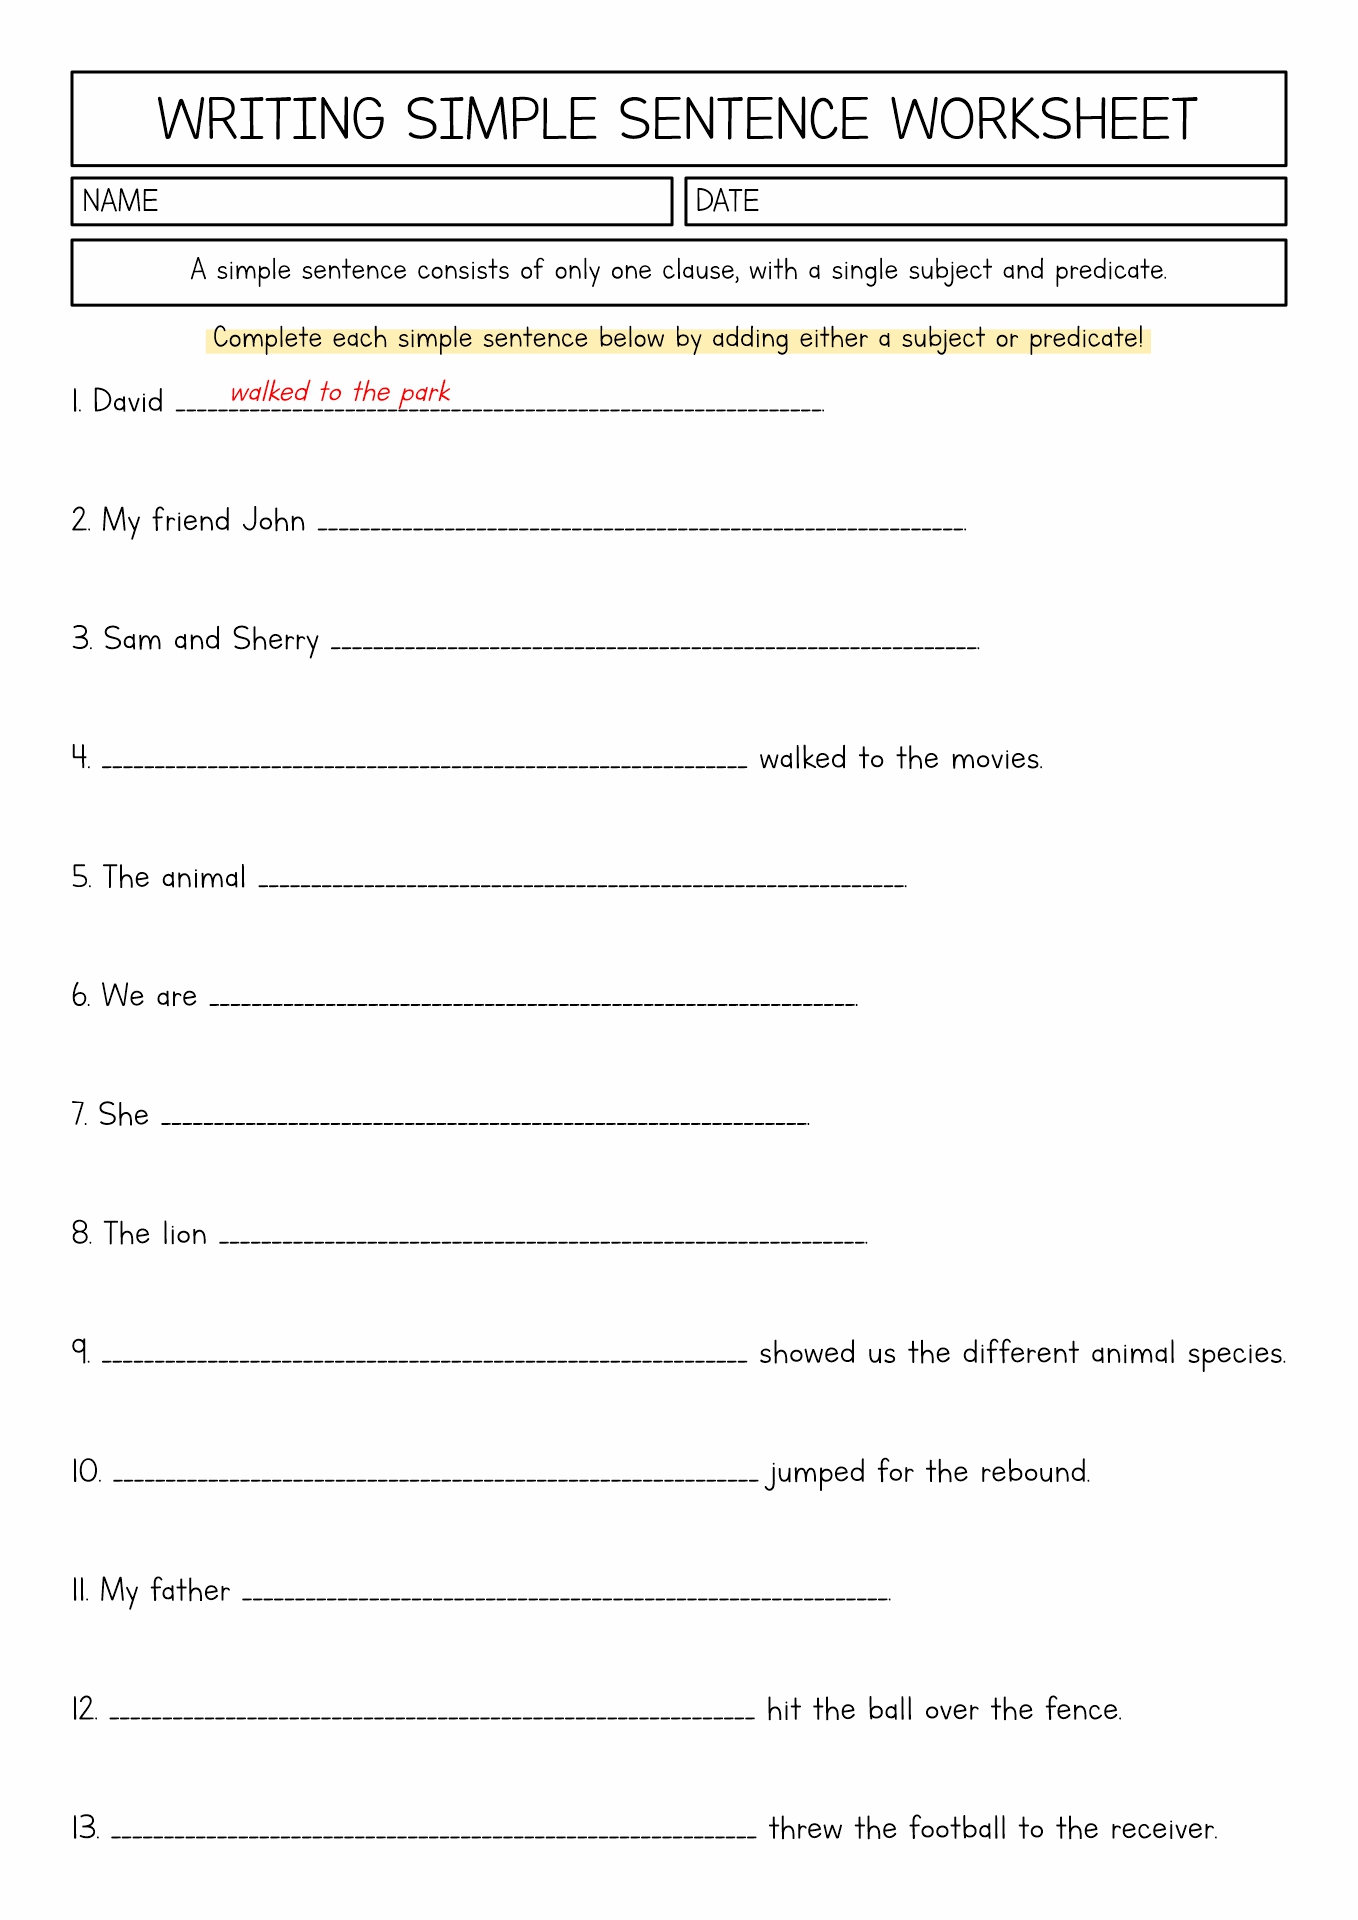 18-best-images-of-4th-grade-essay-writing-worksheets-free-creative-writing-activities-4th